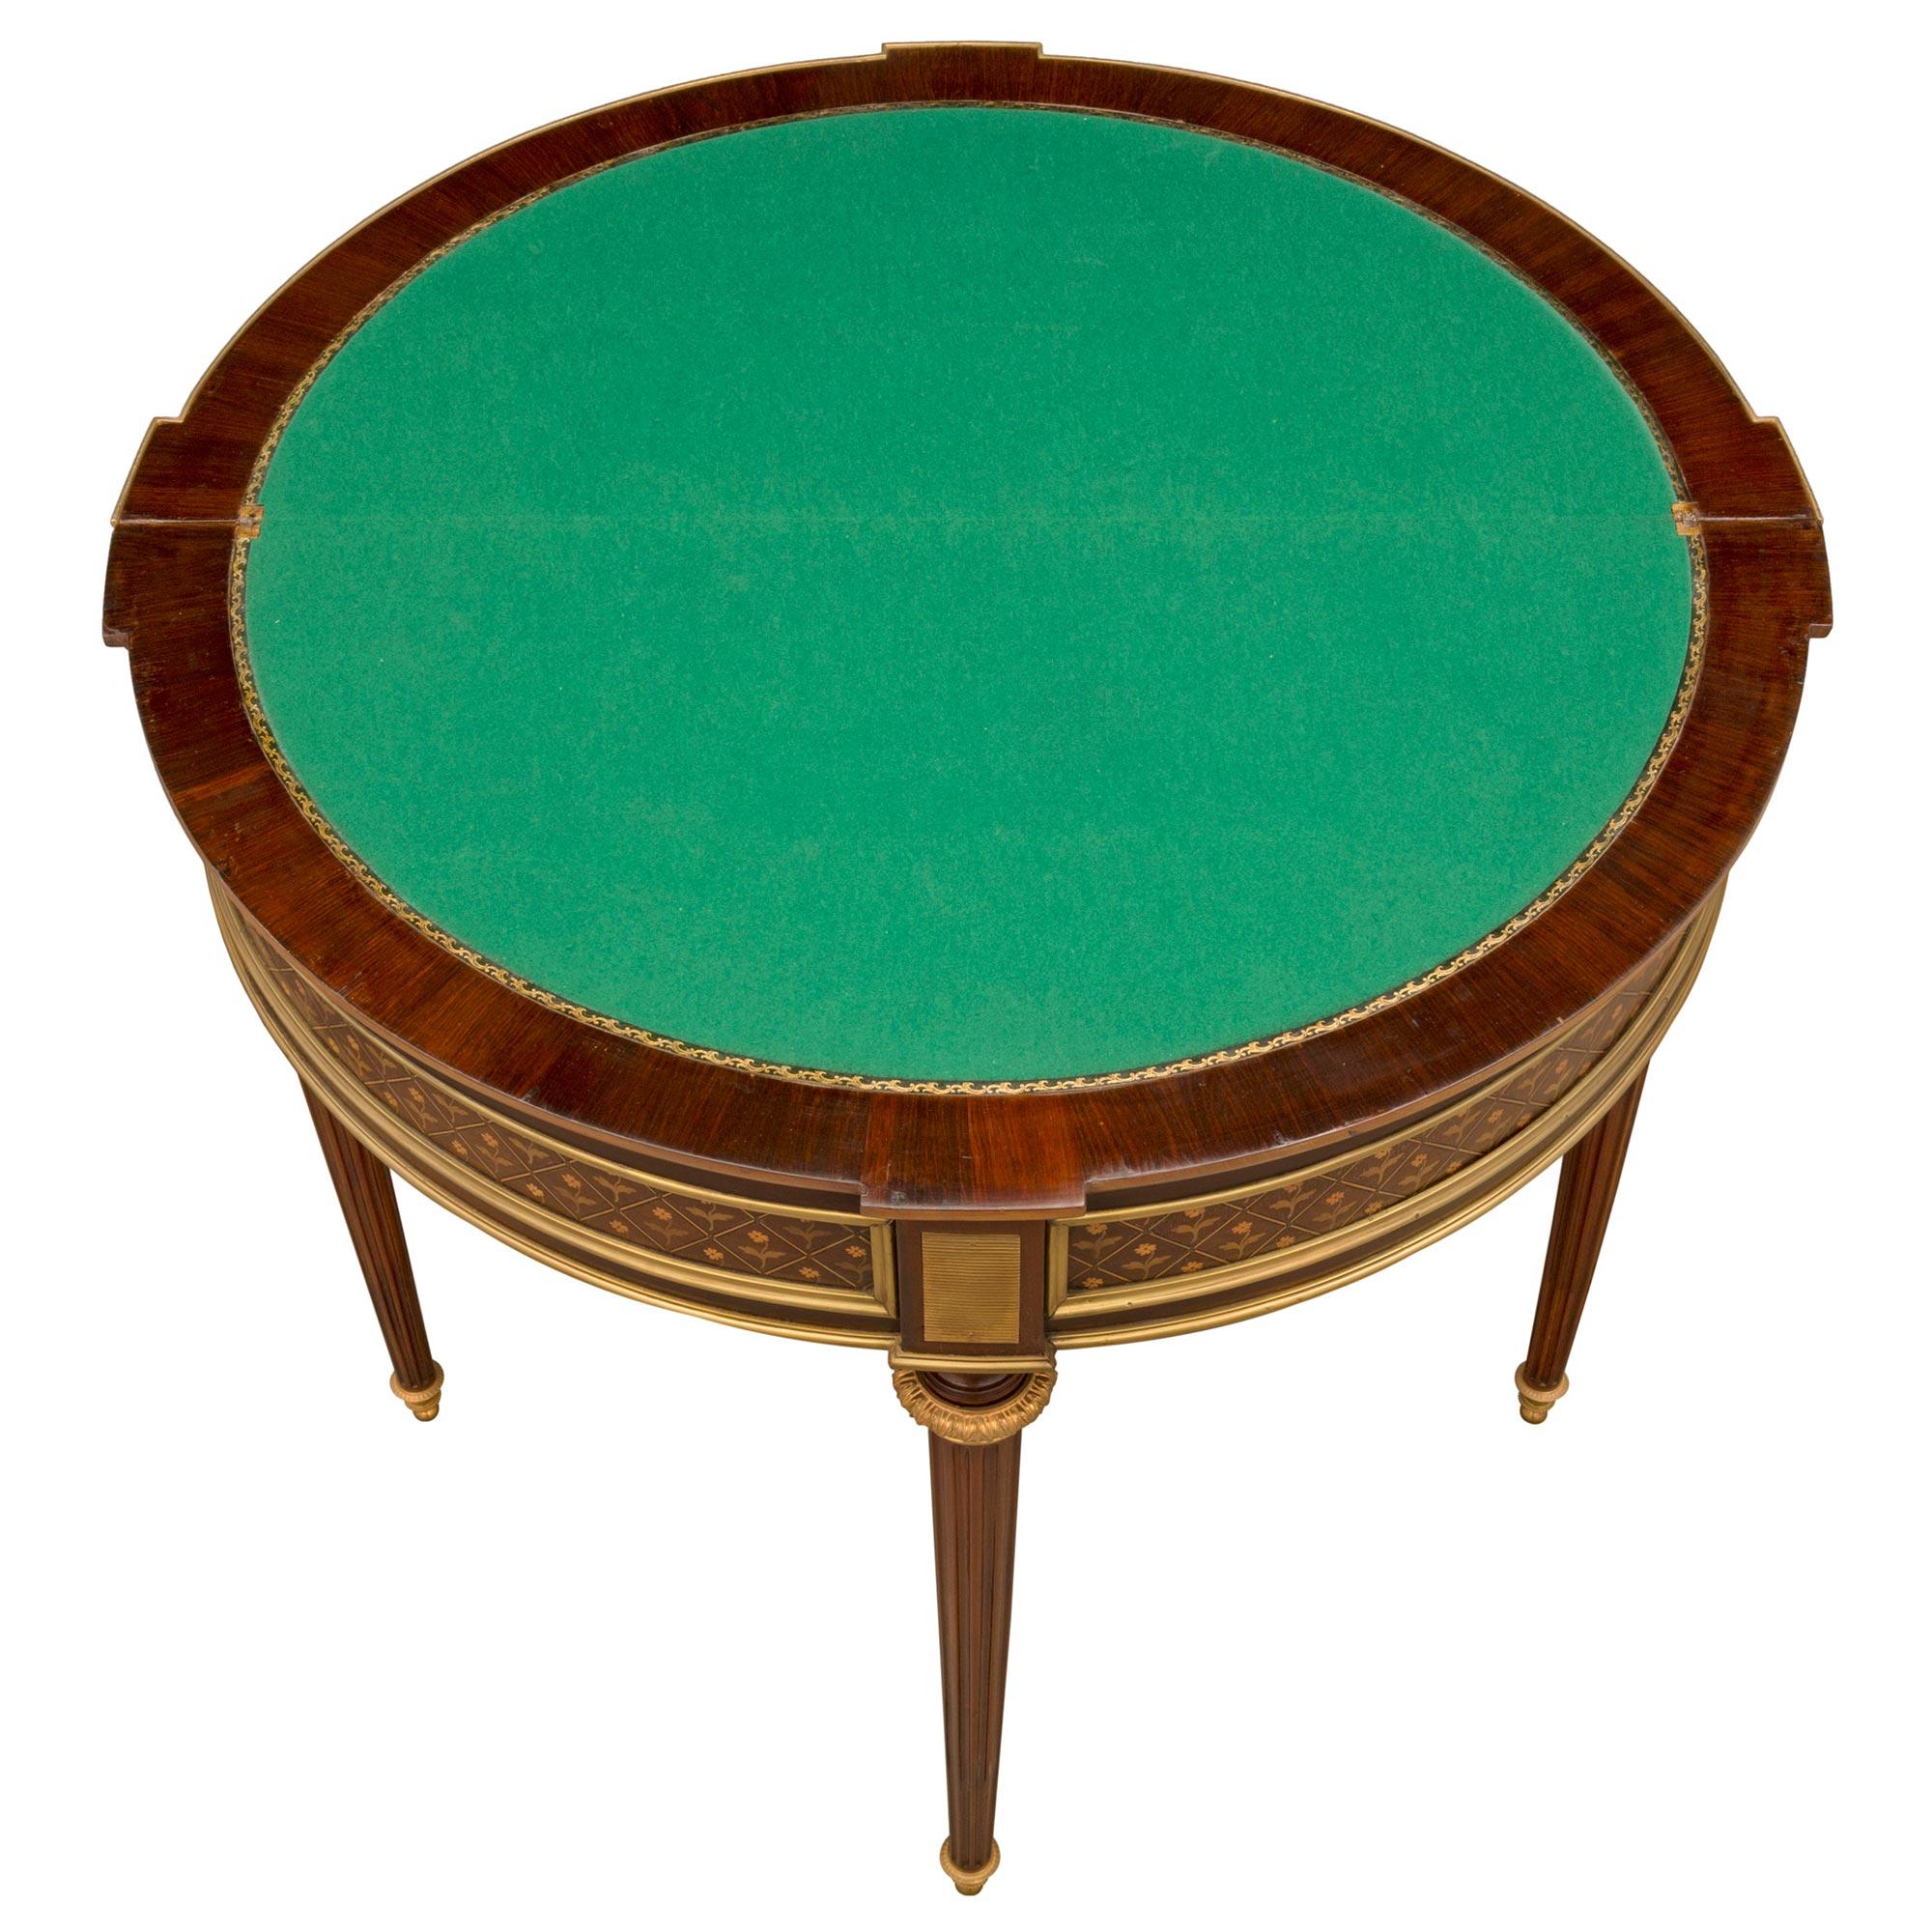 A most elegant French late 19th century Louis XVI st. mahogany, tulipwood, charmwood, and ormolu games table. The table is raised by four circular fluted tapered legs with fine ormolu topie shaped feet and lovely ormolu top caps. Above the front